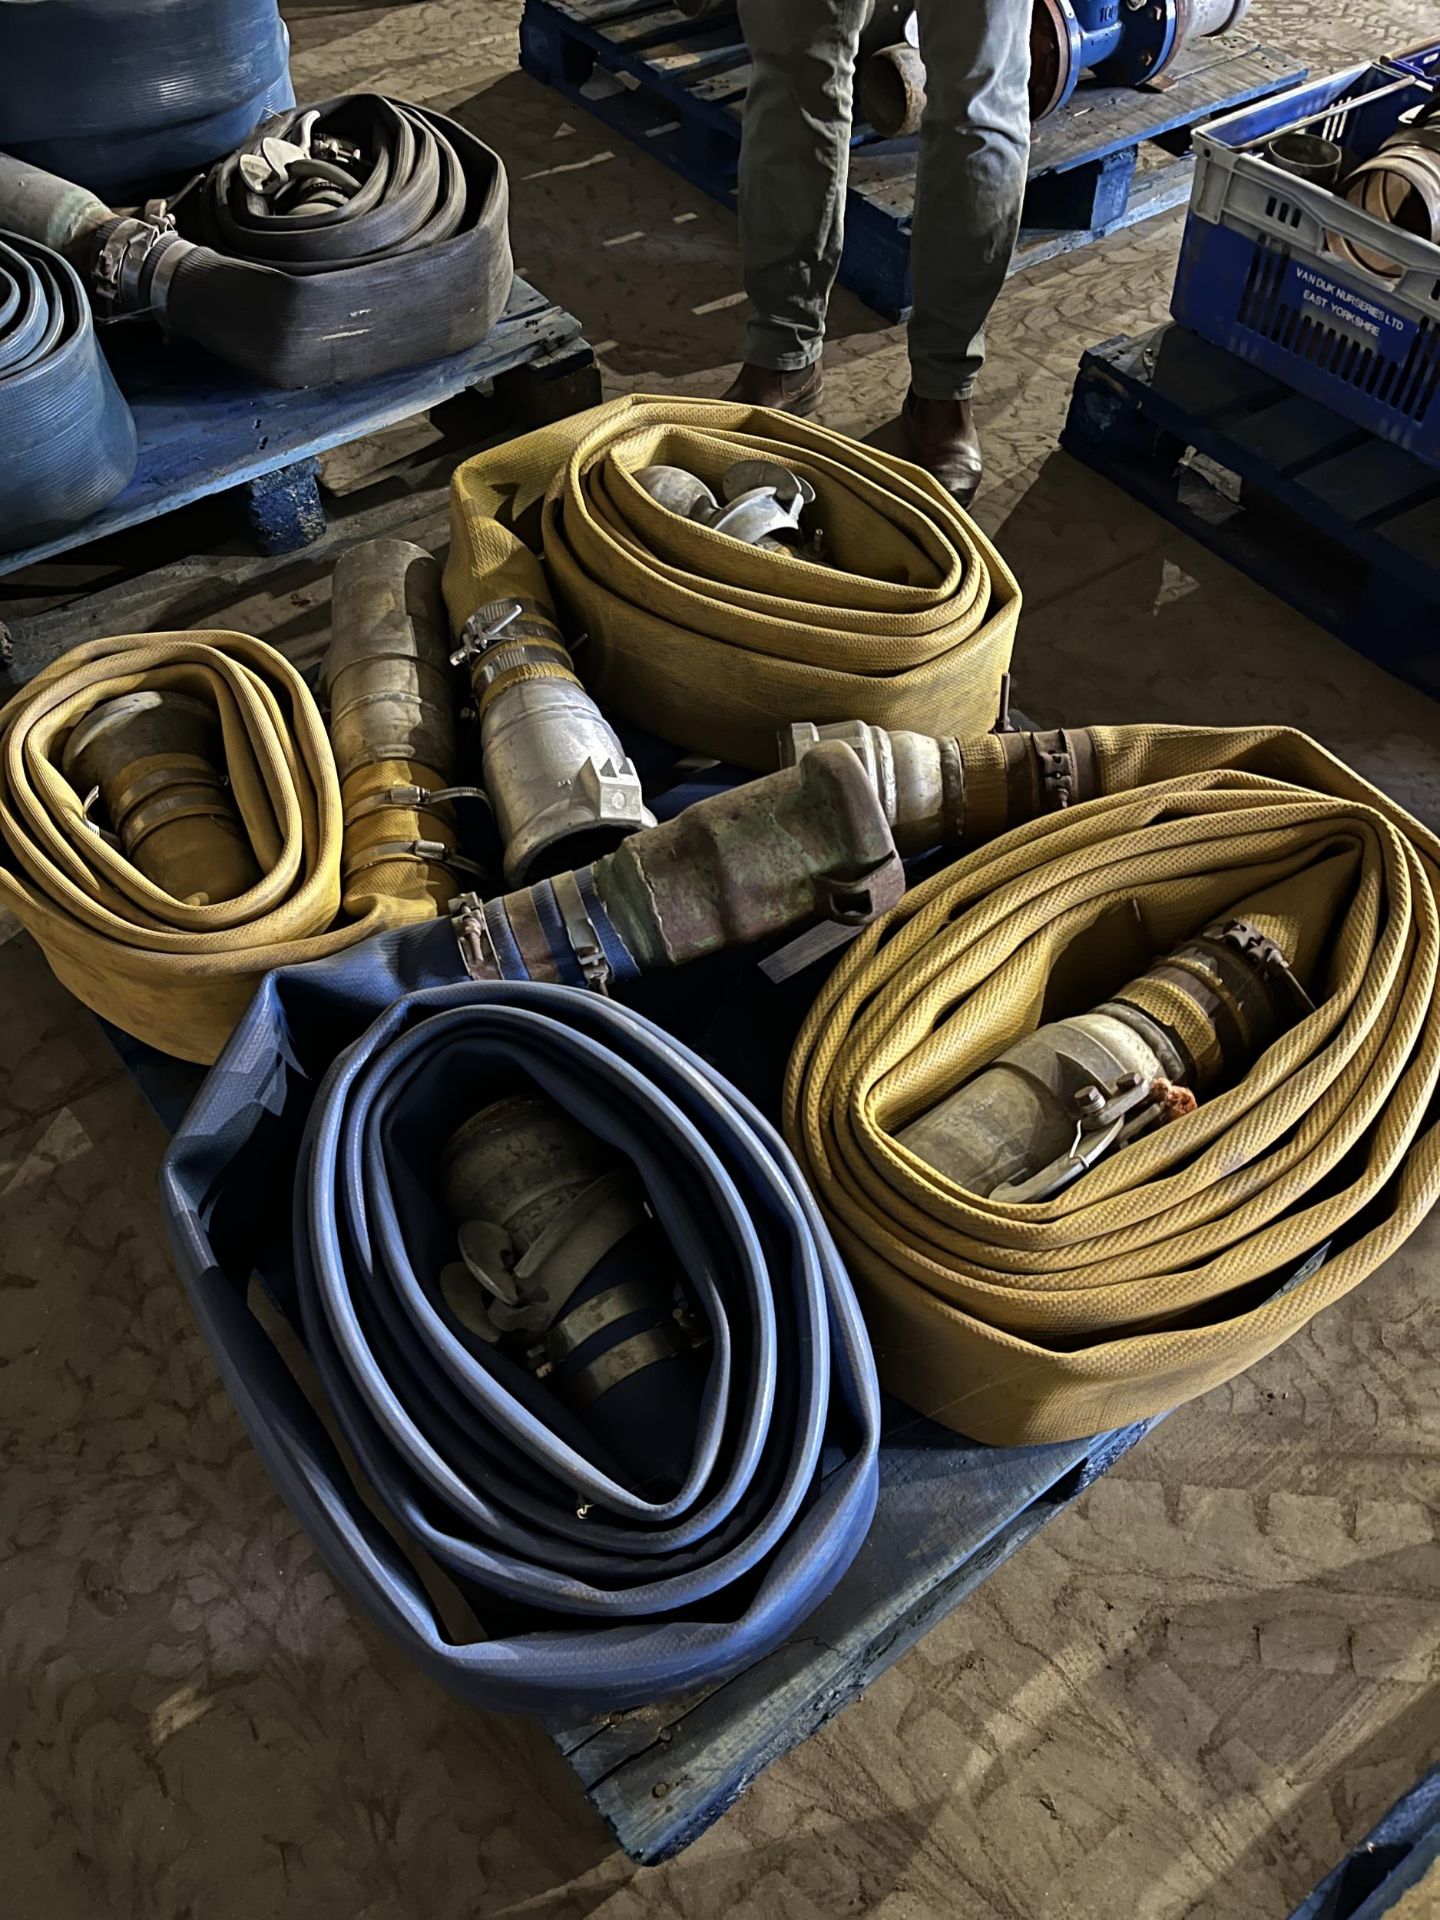 SELECTION OF LAY FLAT IRRIGATION HOSE AND FITTINGS